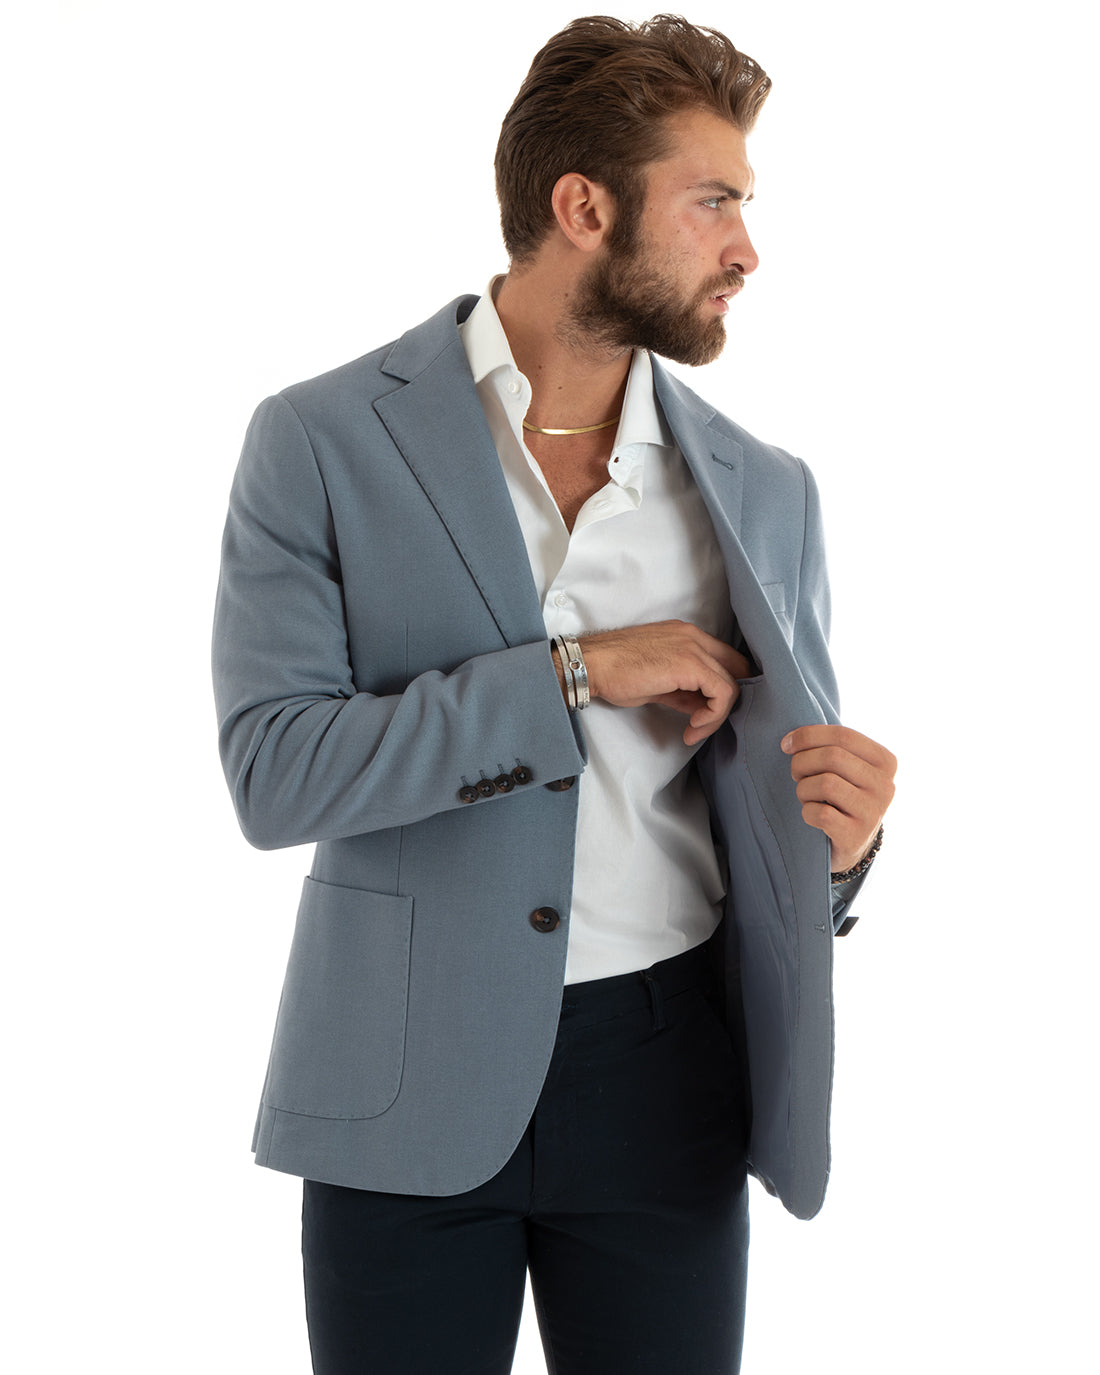 Men's Blazer Basic Single-breasted Classic Lapel Stitched Solid Color Powder Casual GIOSAL-G3087A